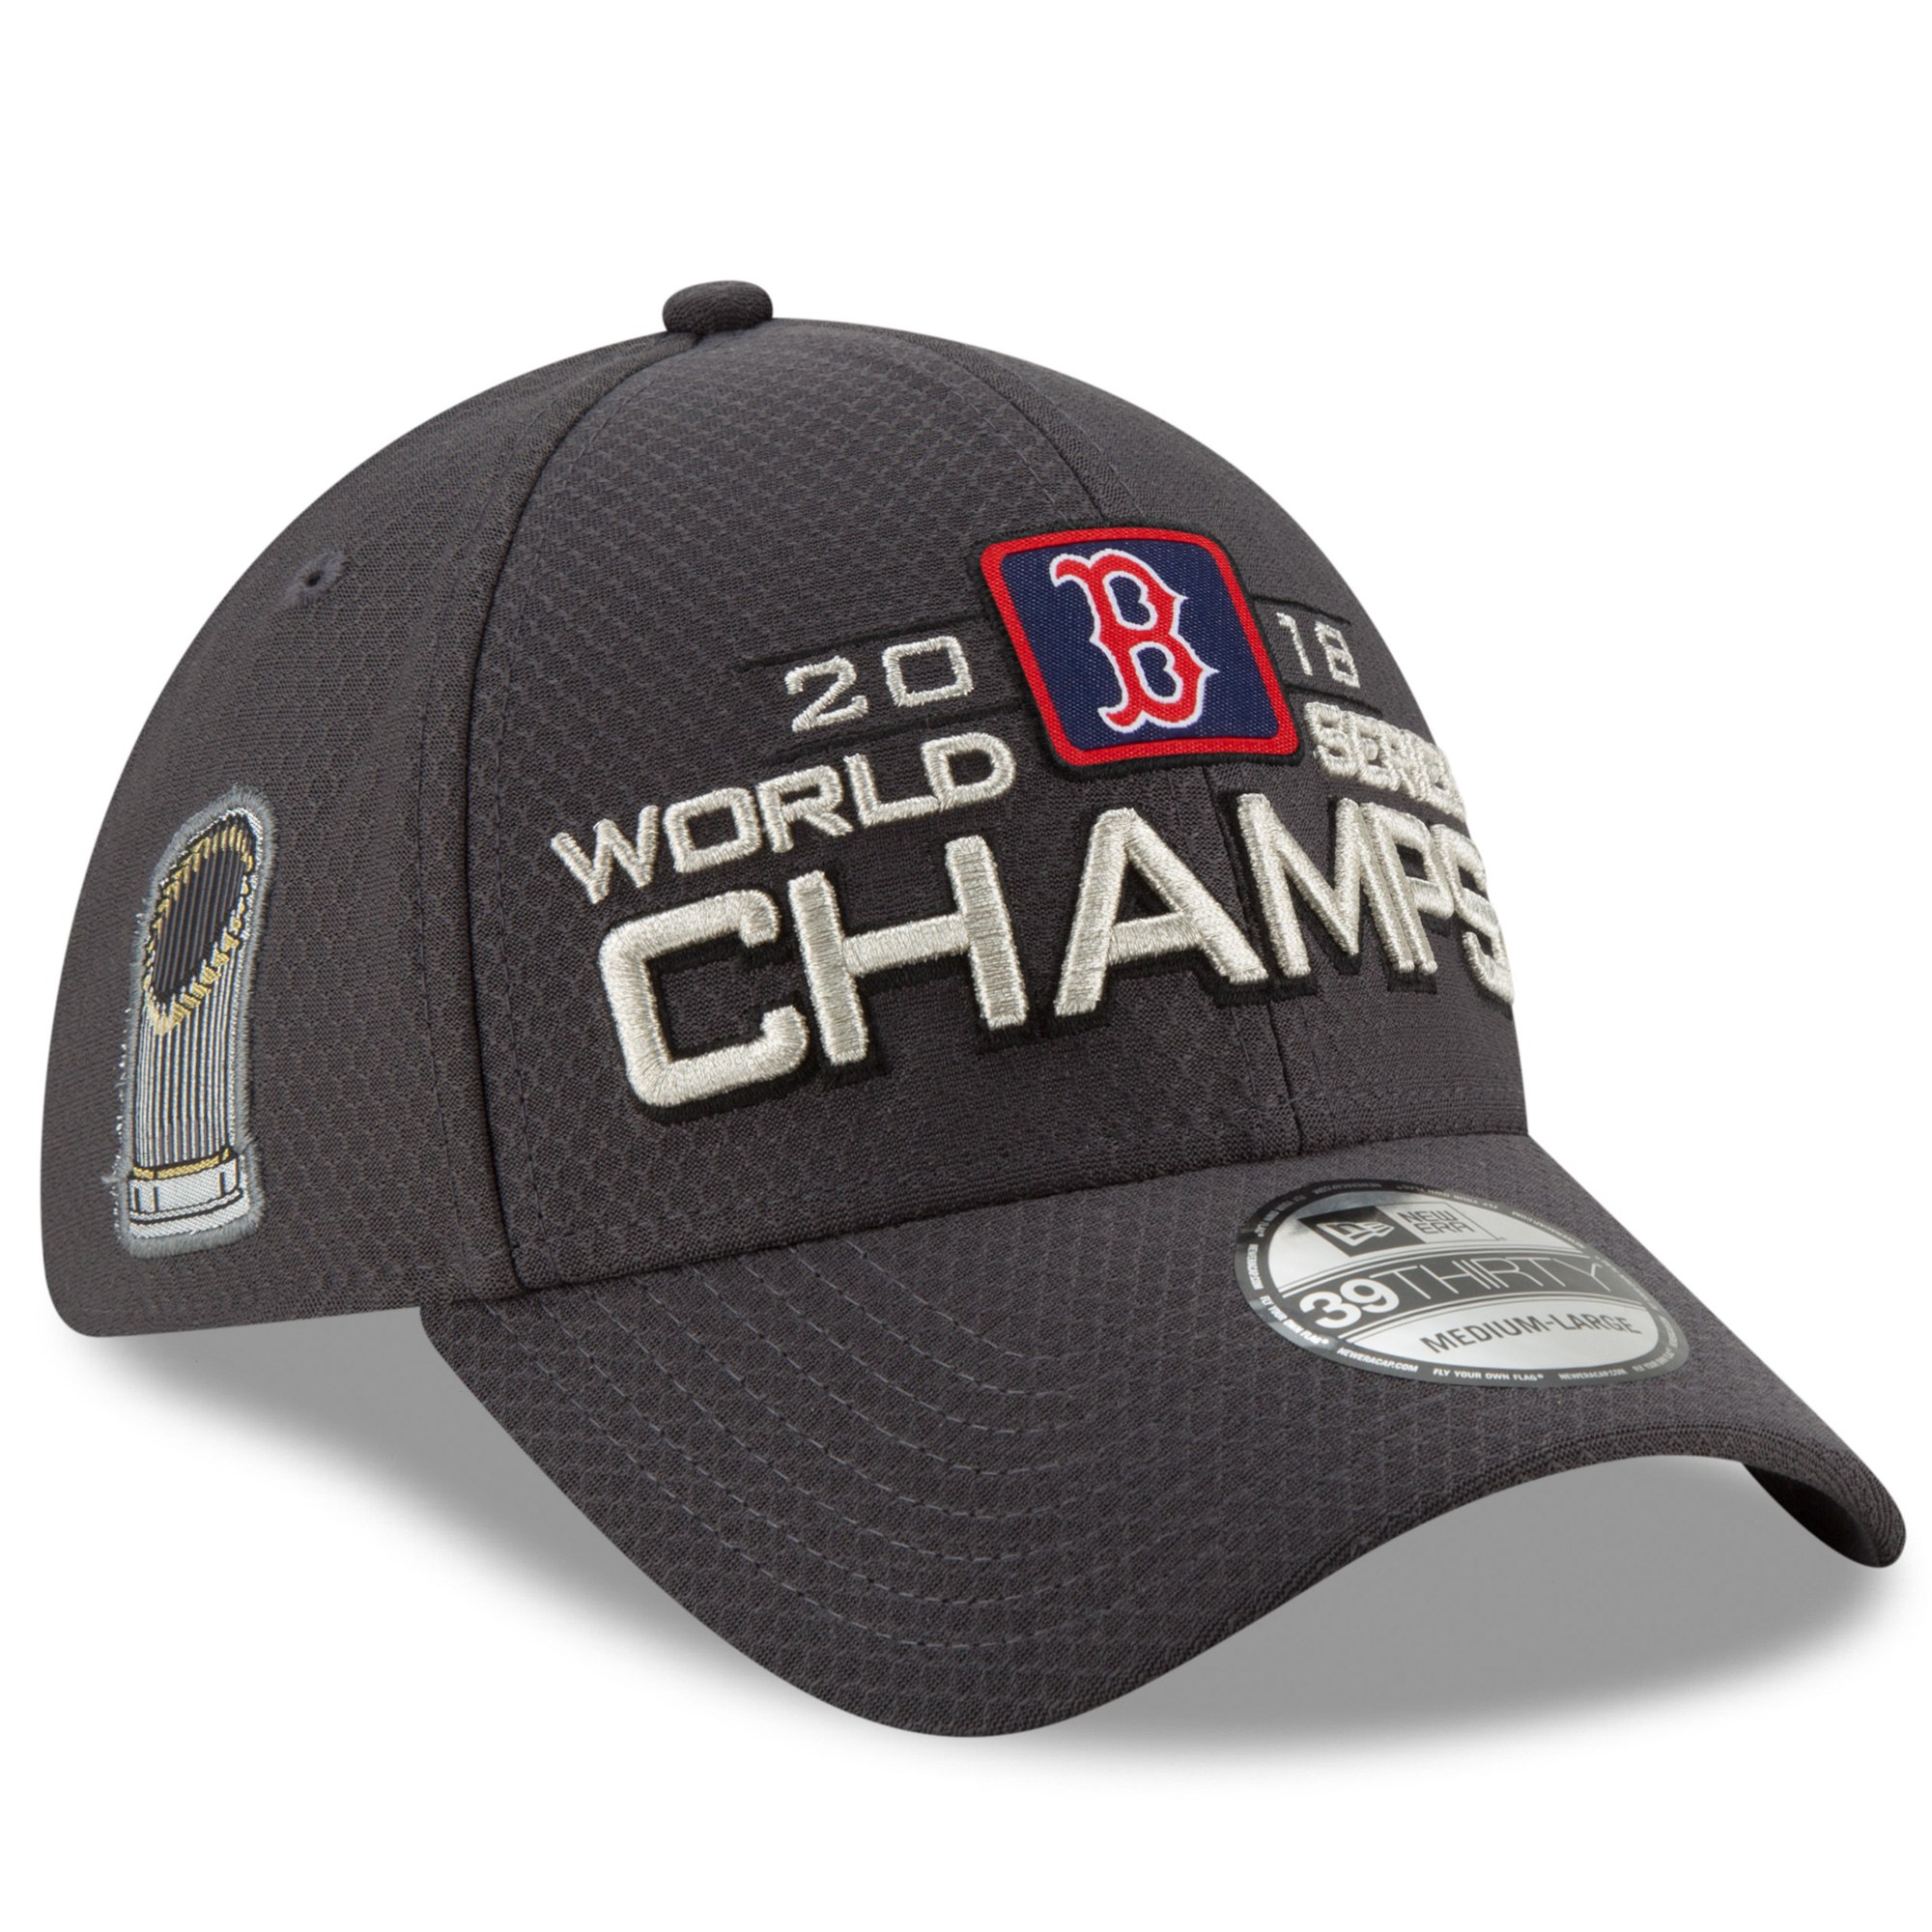 Red Sox World Series Champions Gear 